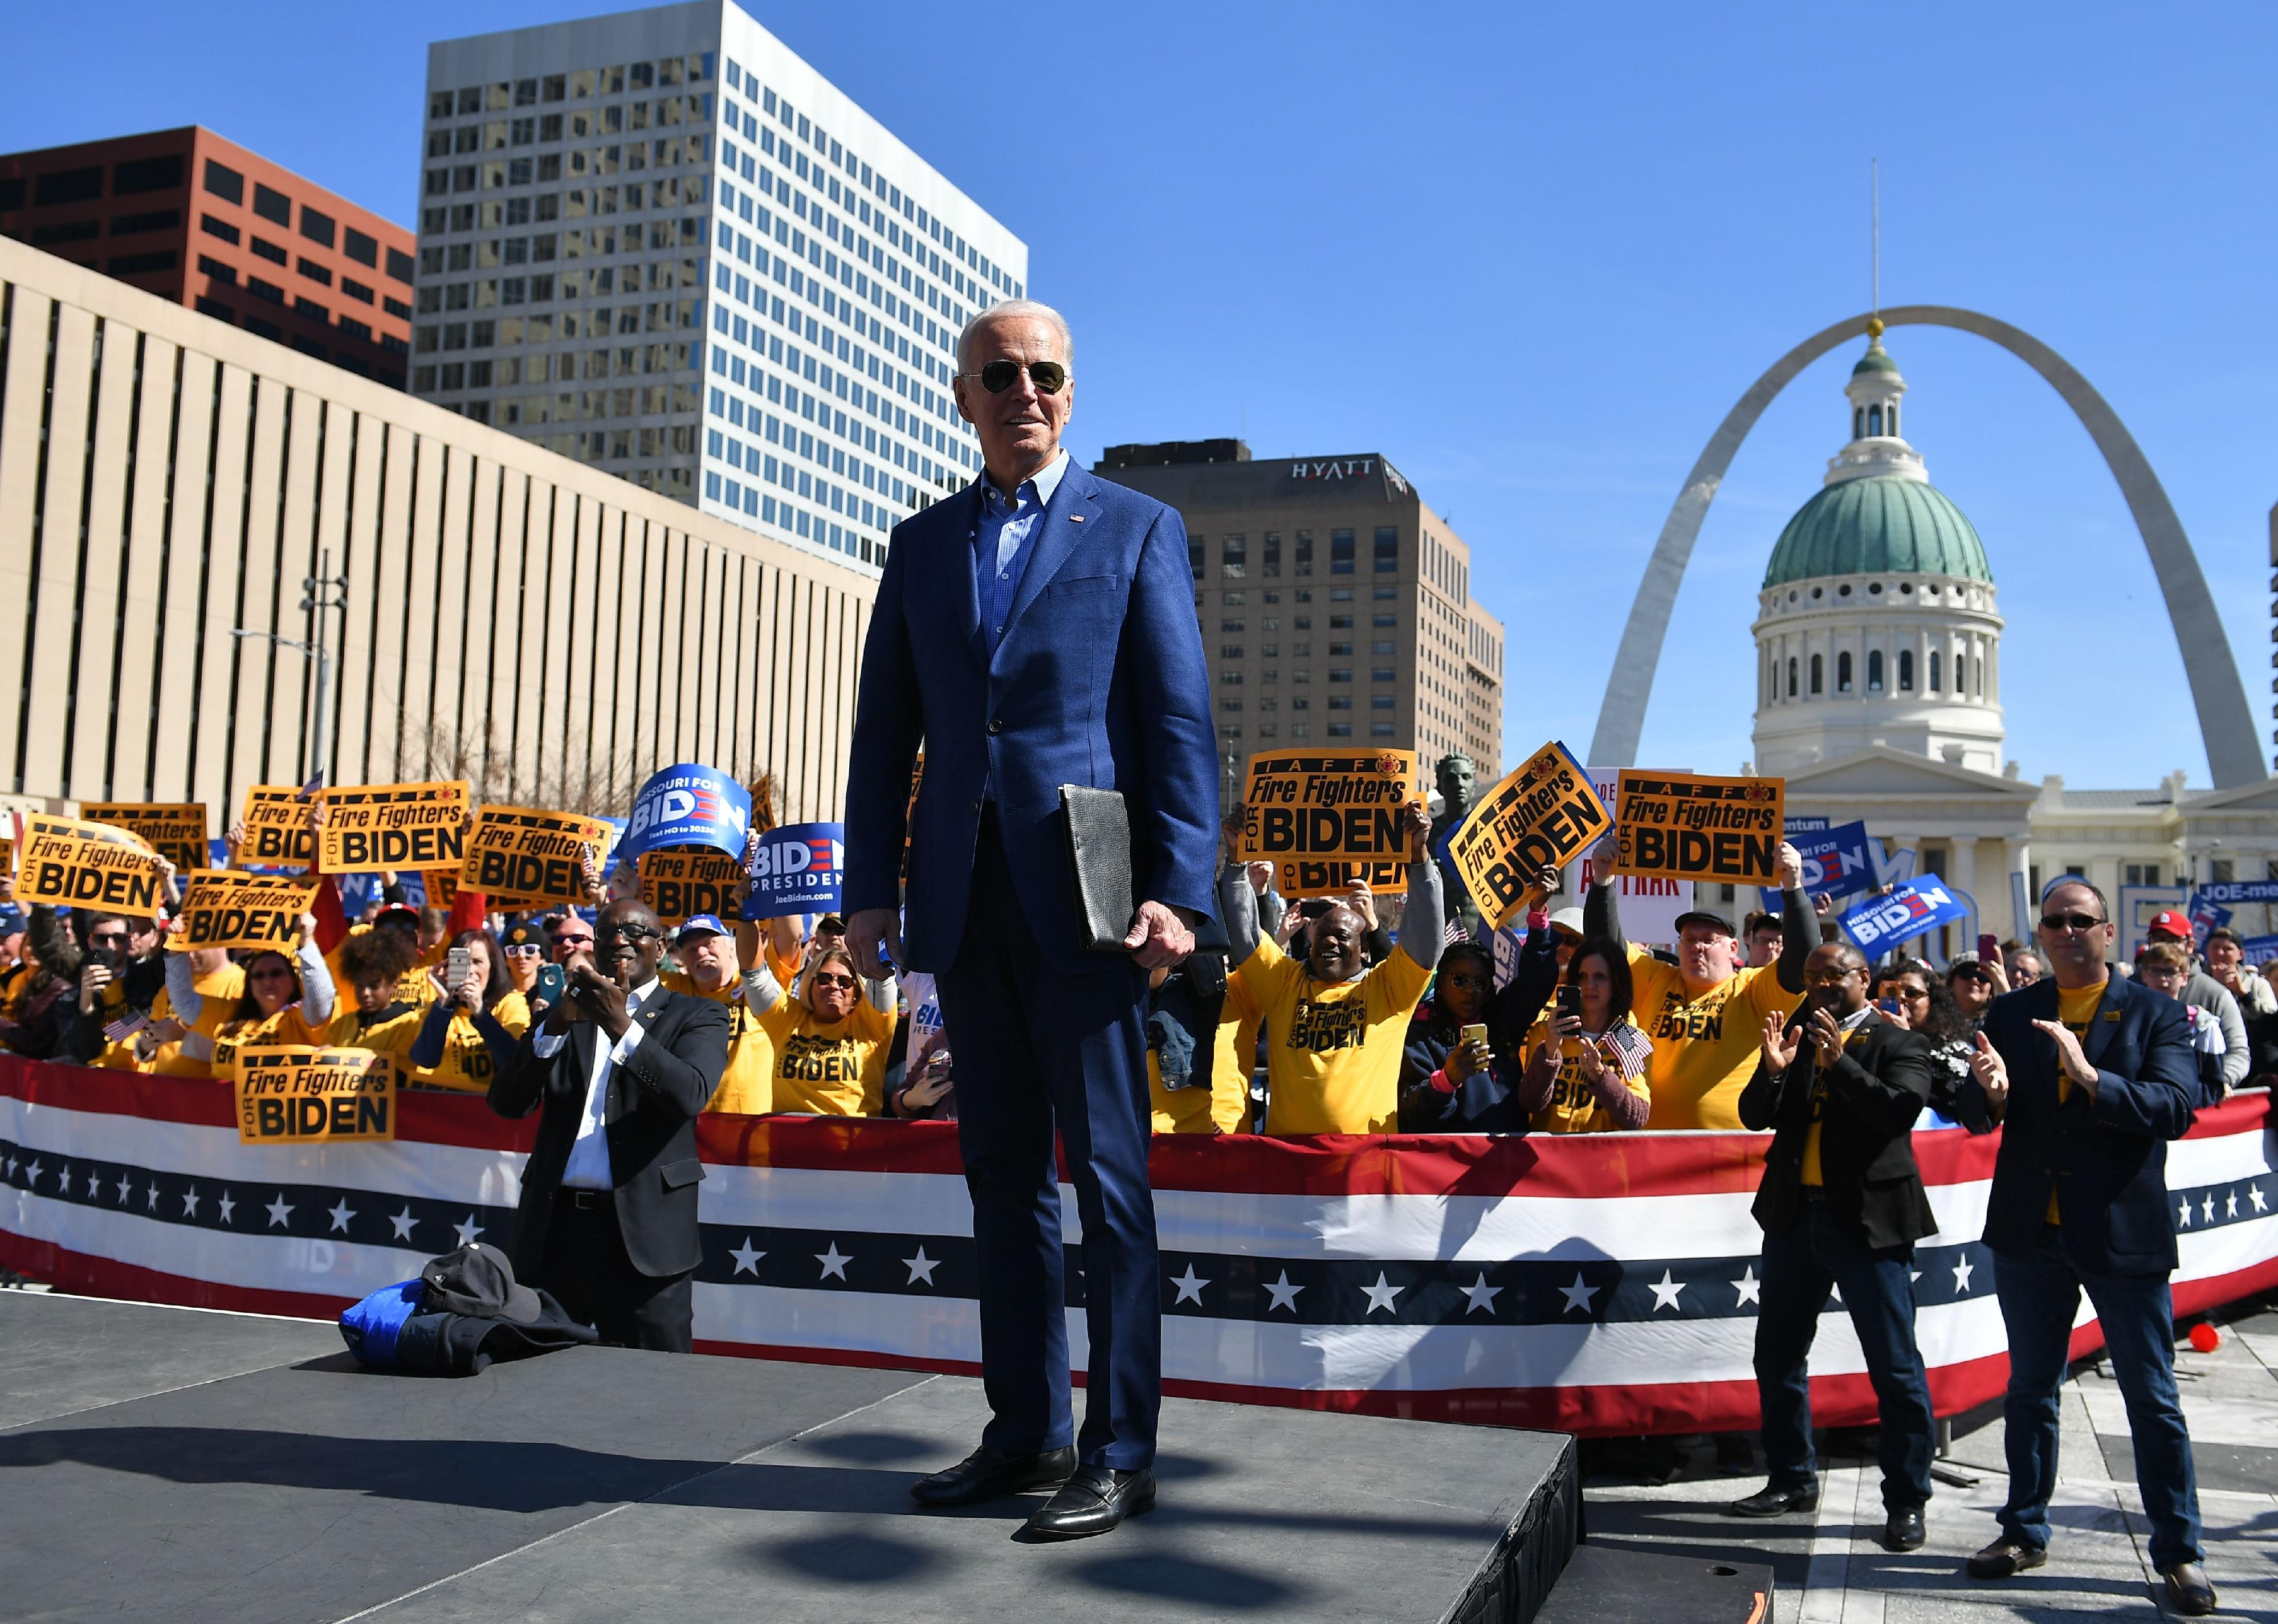 Biden onstage in front of a crowd of firefighters in St. Louis, MO.